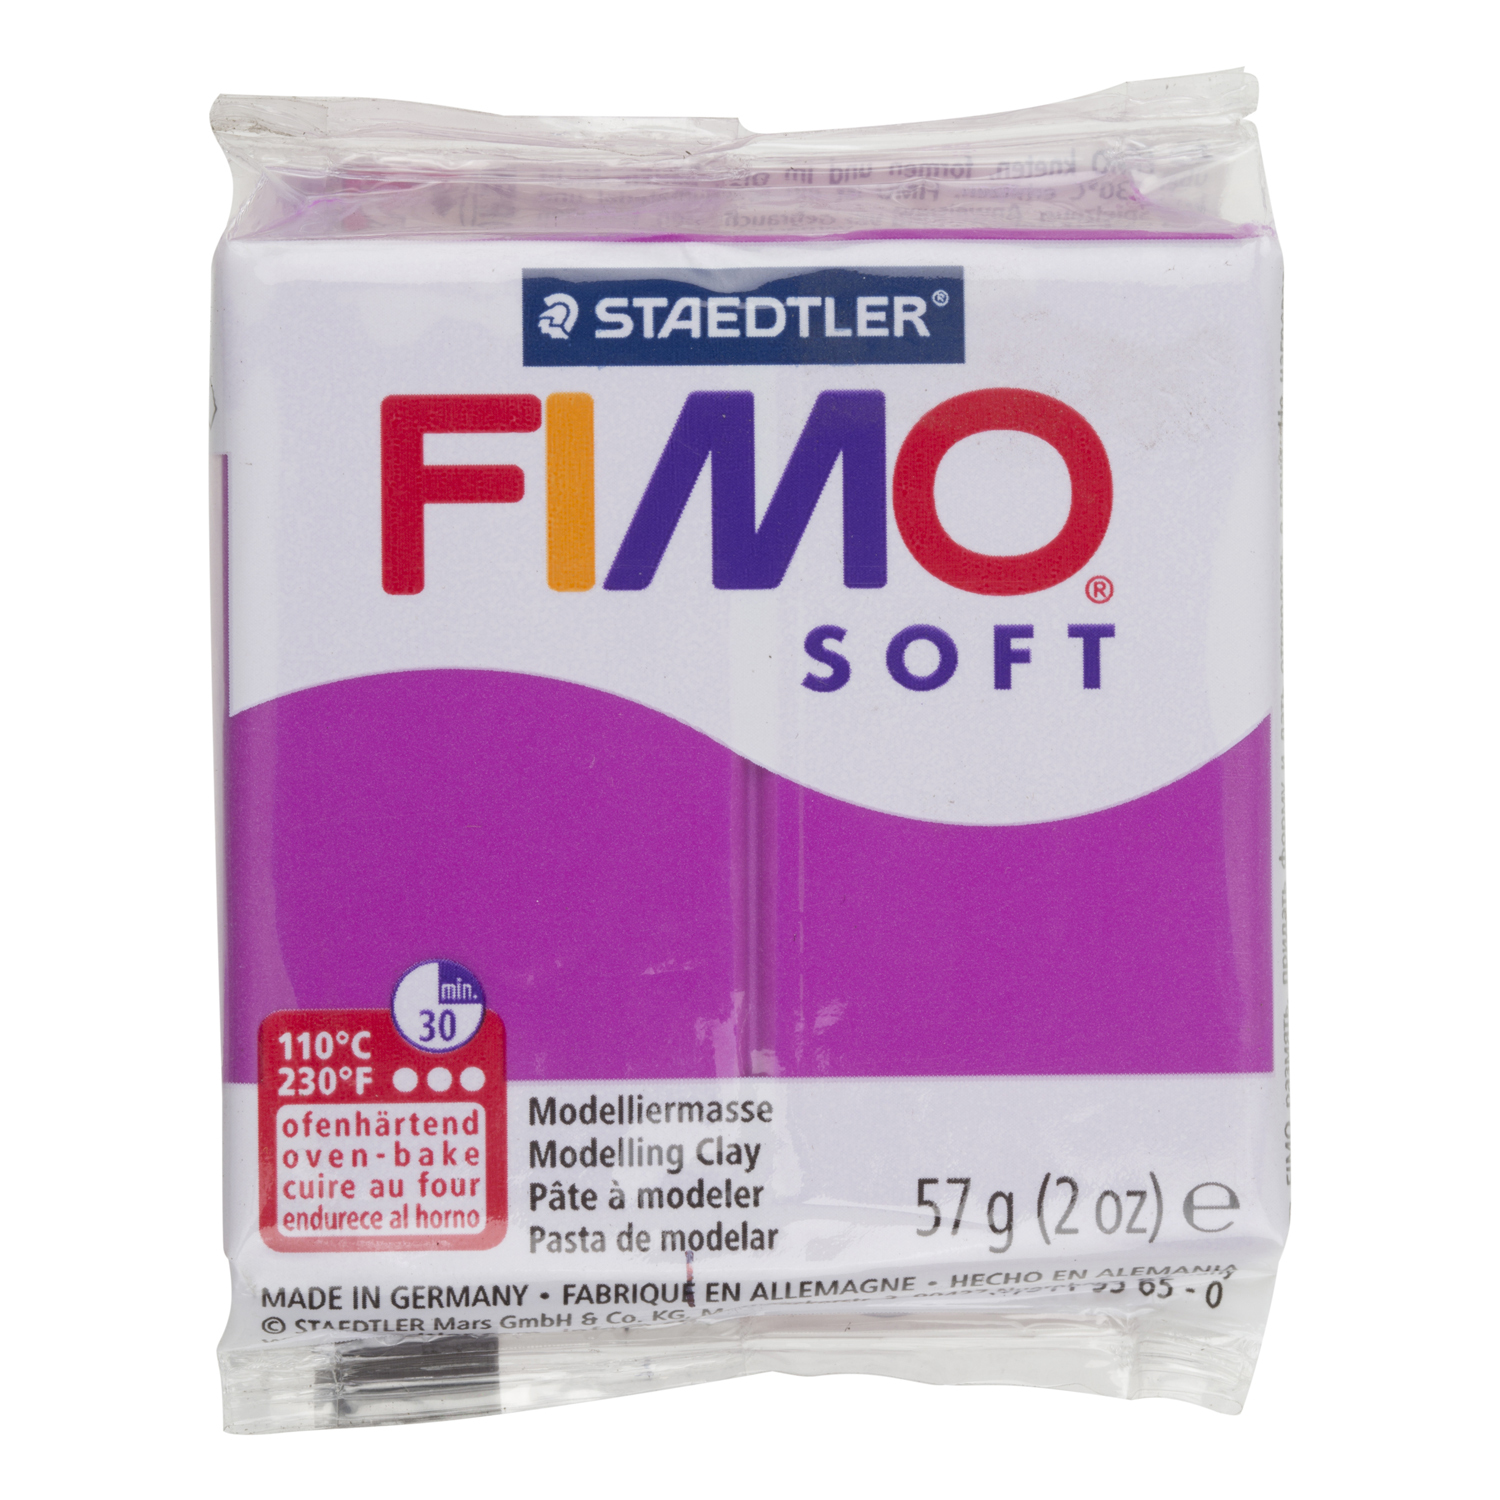 Staedtler FIMO Soft Modelling Clay Block - Plum Image 3